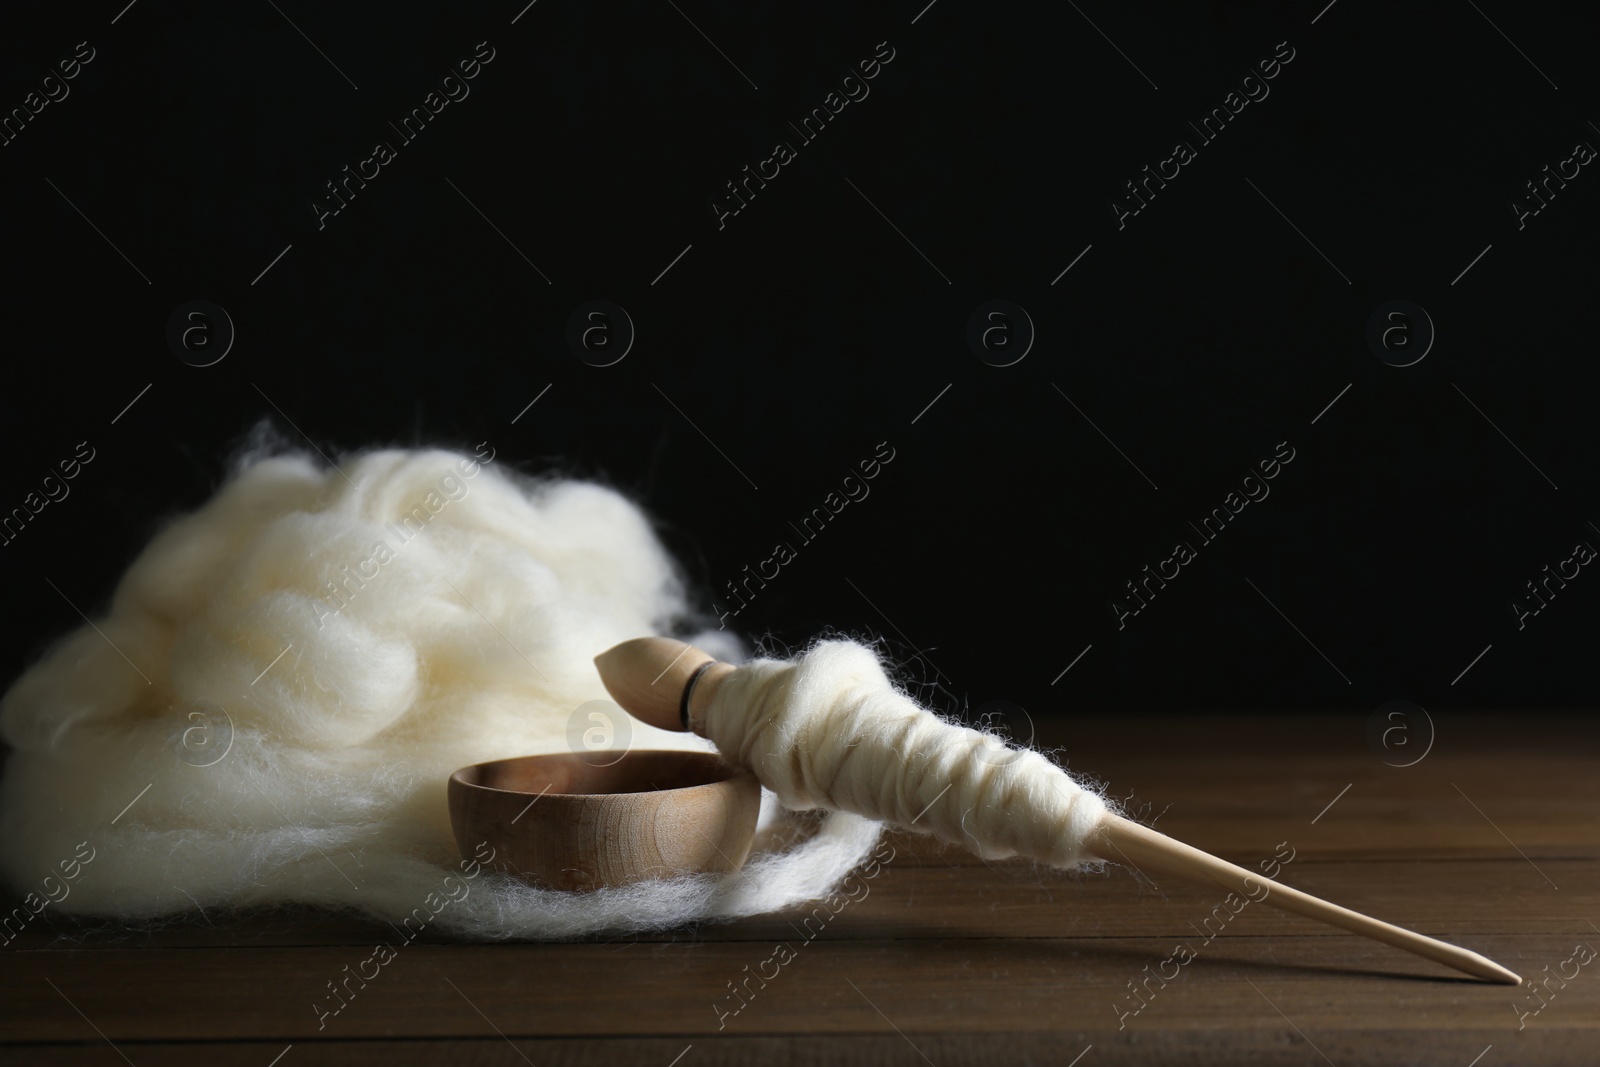 Photo of Soft white wool and spindle on wooden table against black background, space for text